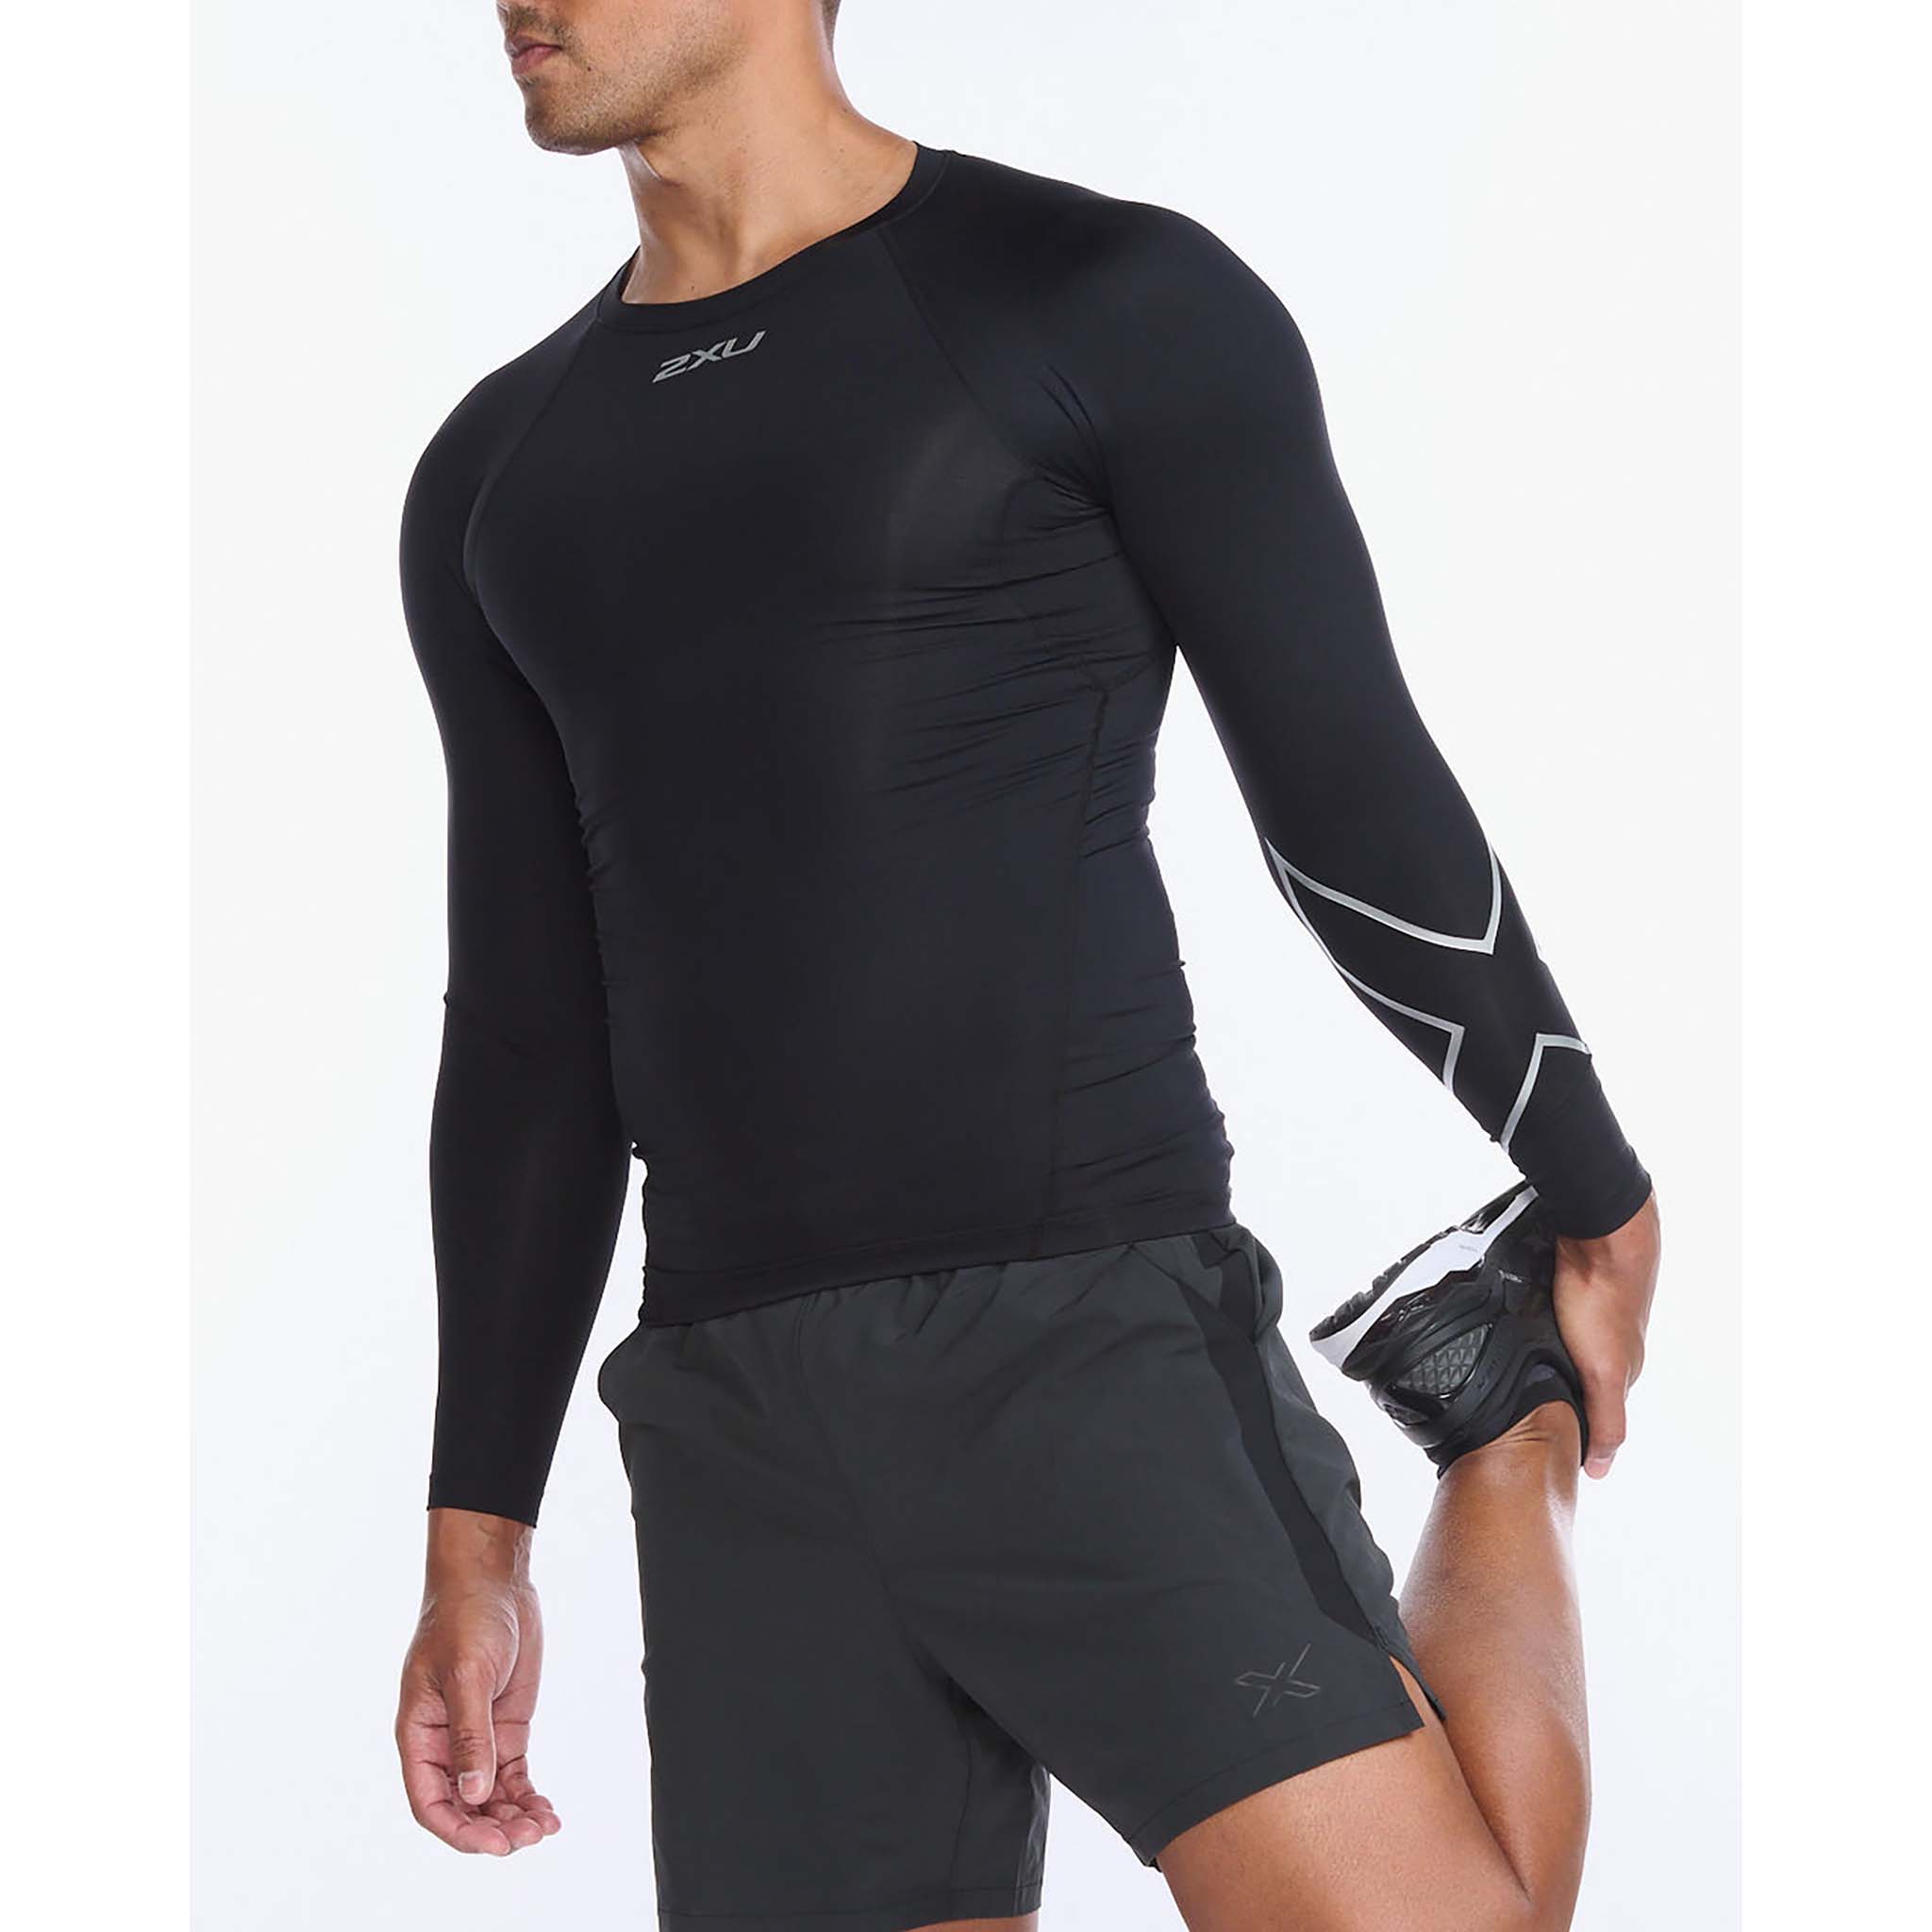 2XU long sleeve Core compression shirt for men - Soccer Sport Fitness